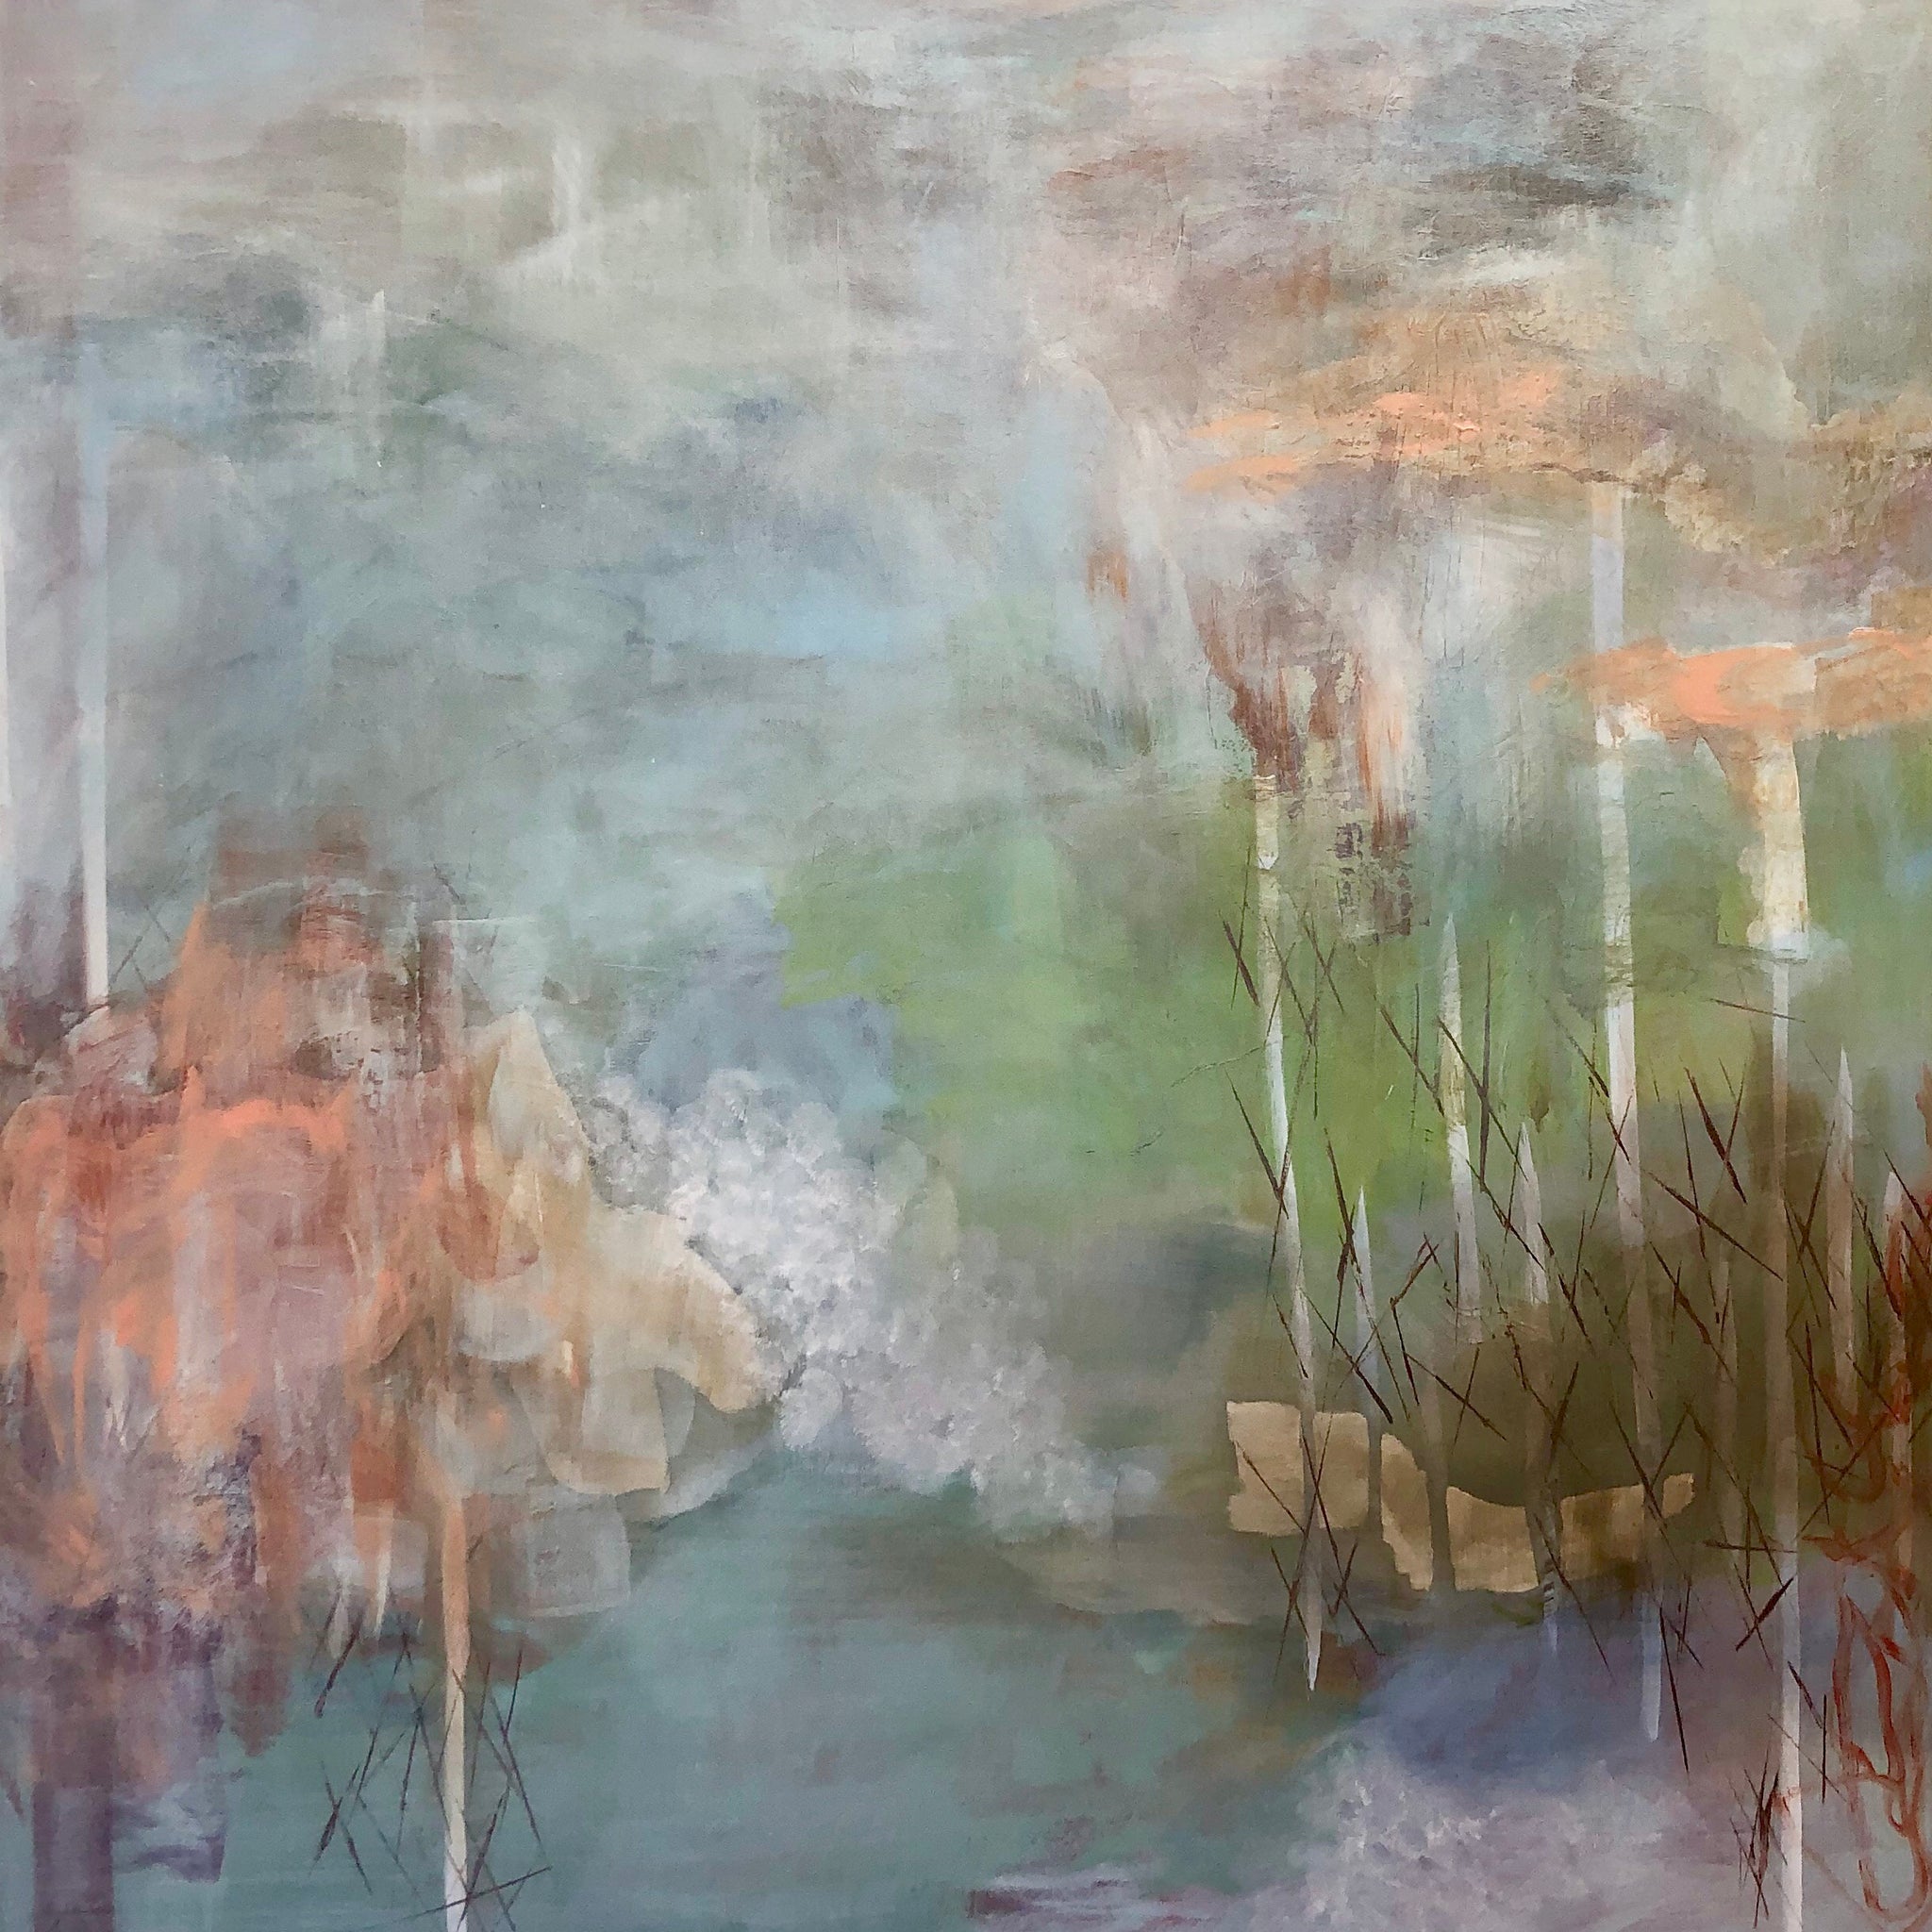 On the river 1, 2018, Acrylic, 48 x 48 inches